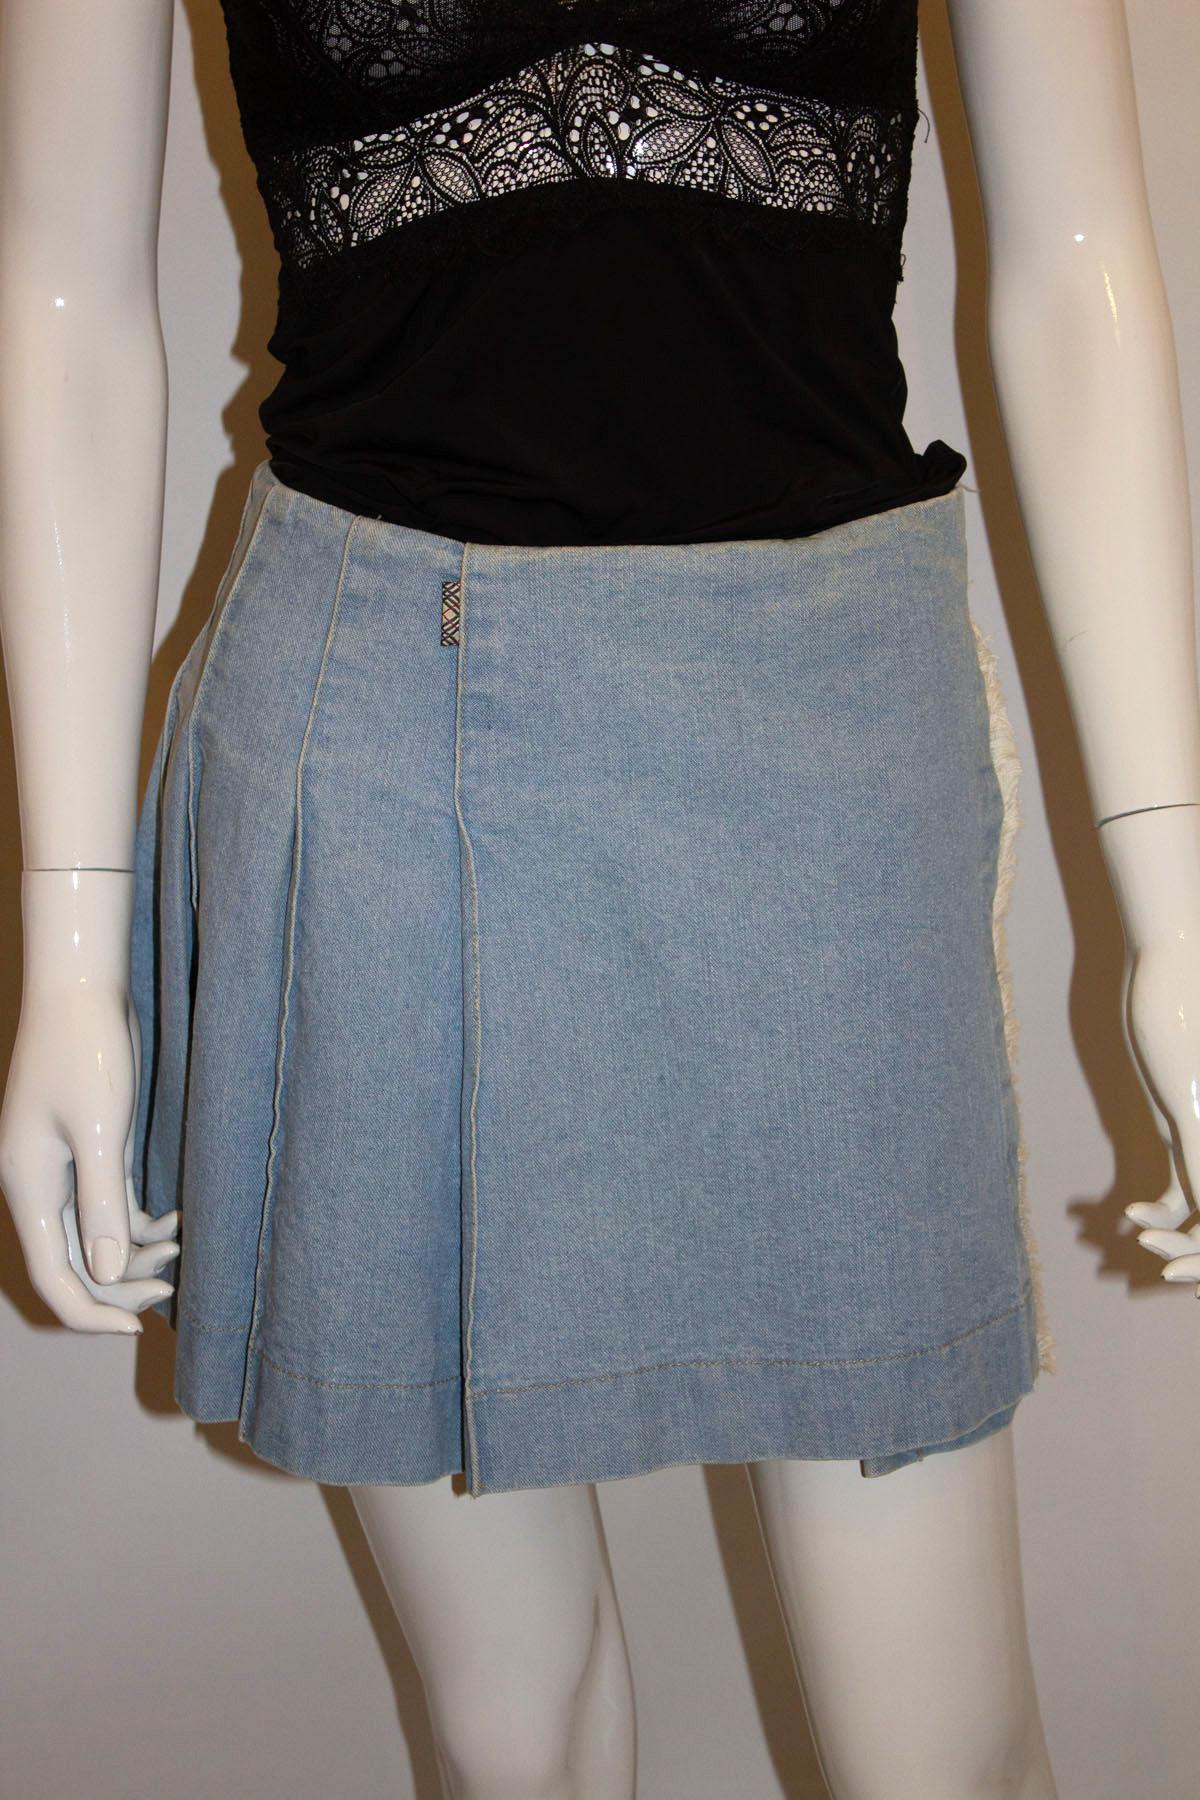 A fun and easy to wear vintage mini kilt by British firm Burberry . In  a heavy denim fabric the kilt has sewn down pleats, producing a smooth line over the hips, and hangs beautifully. It has the Burberry check lining, and a leather strap and